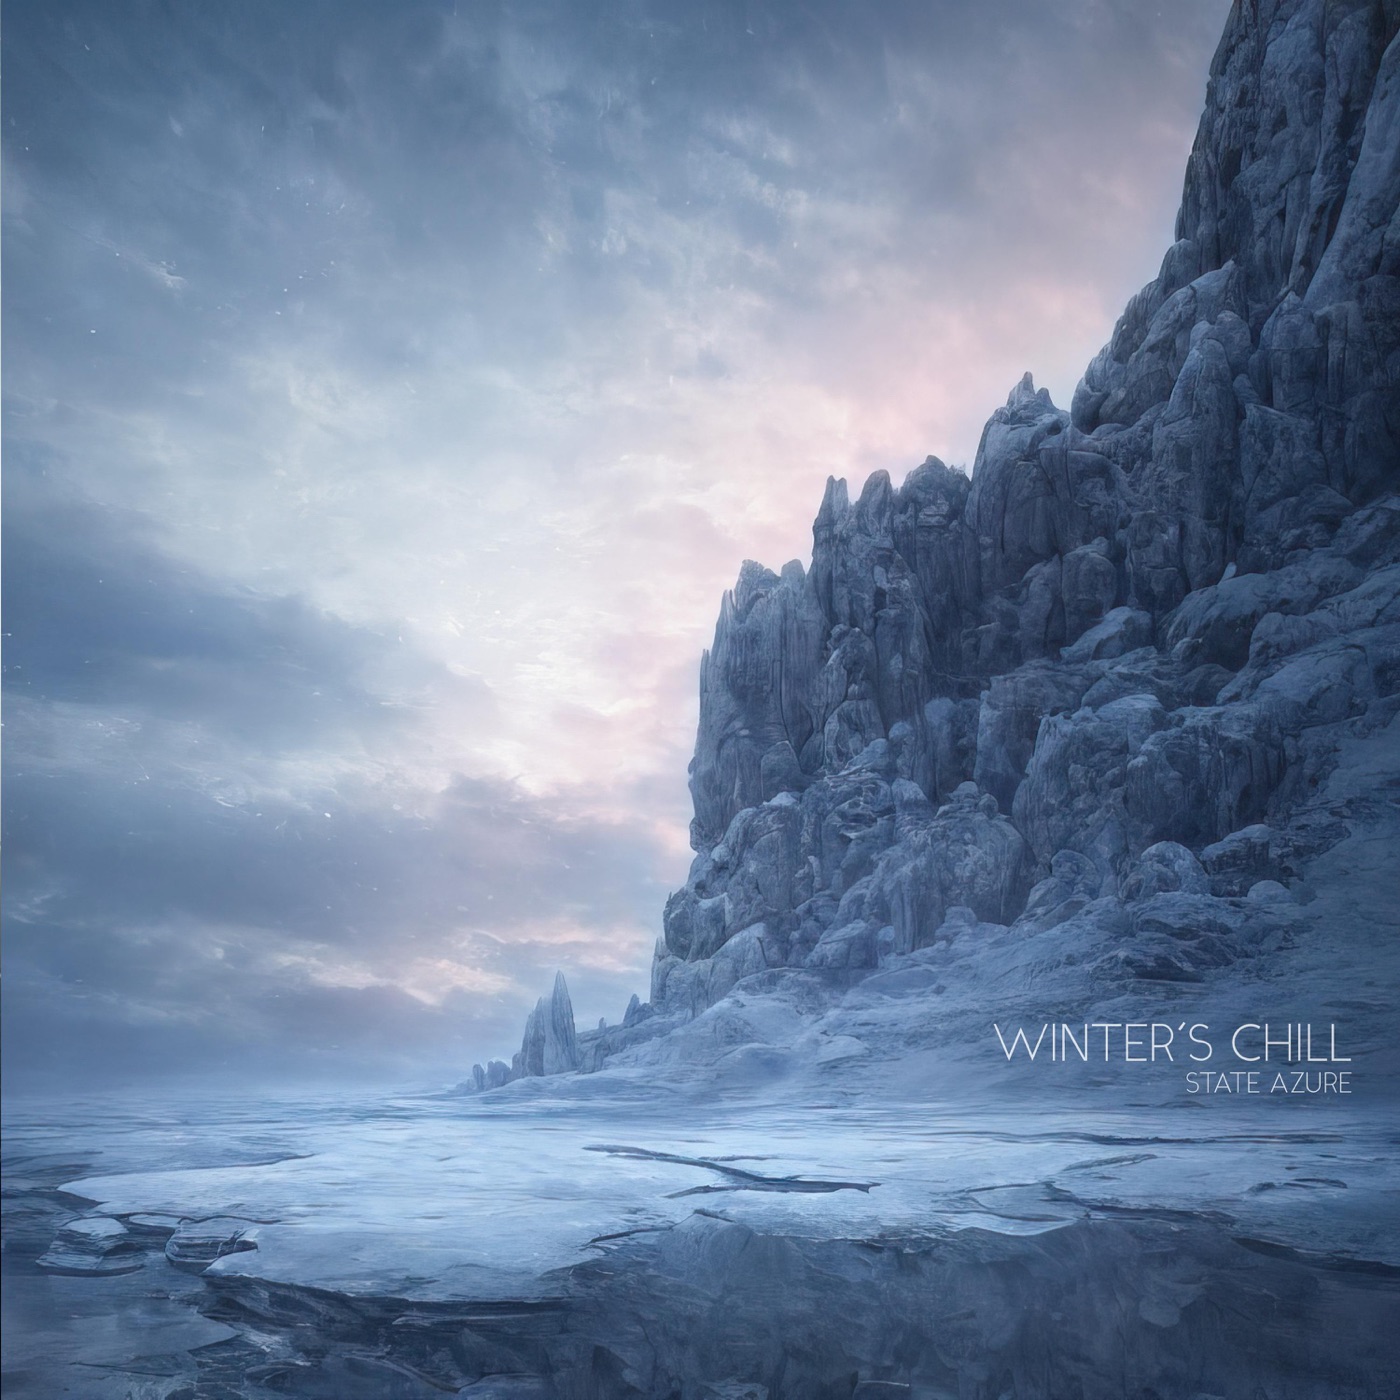 Winter's Chill by State Azure